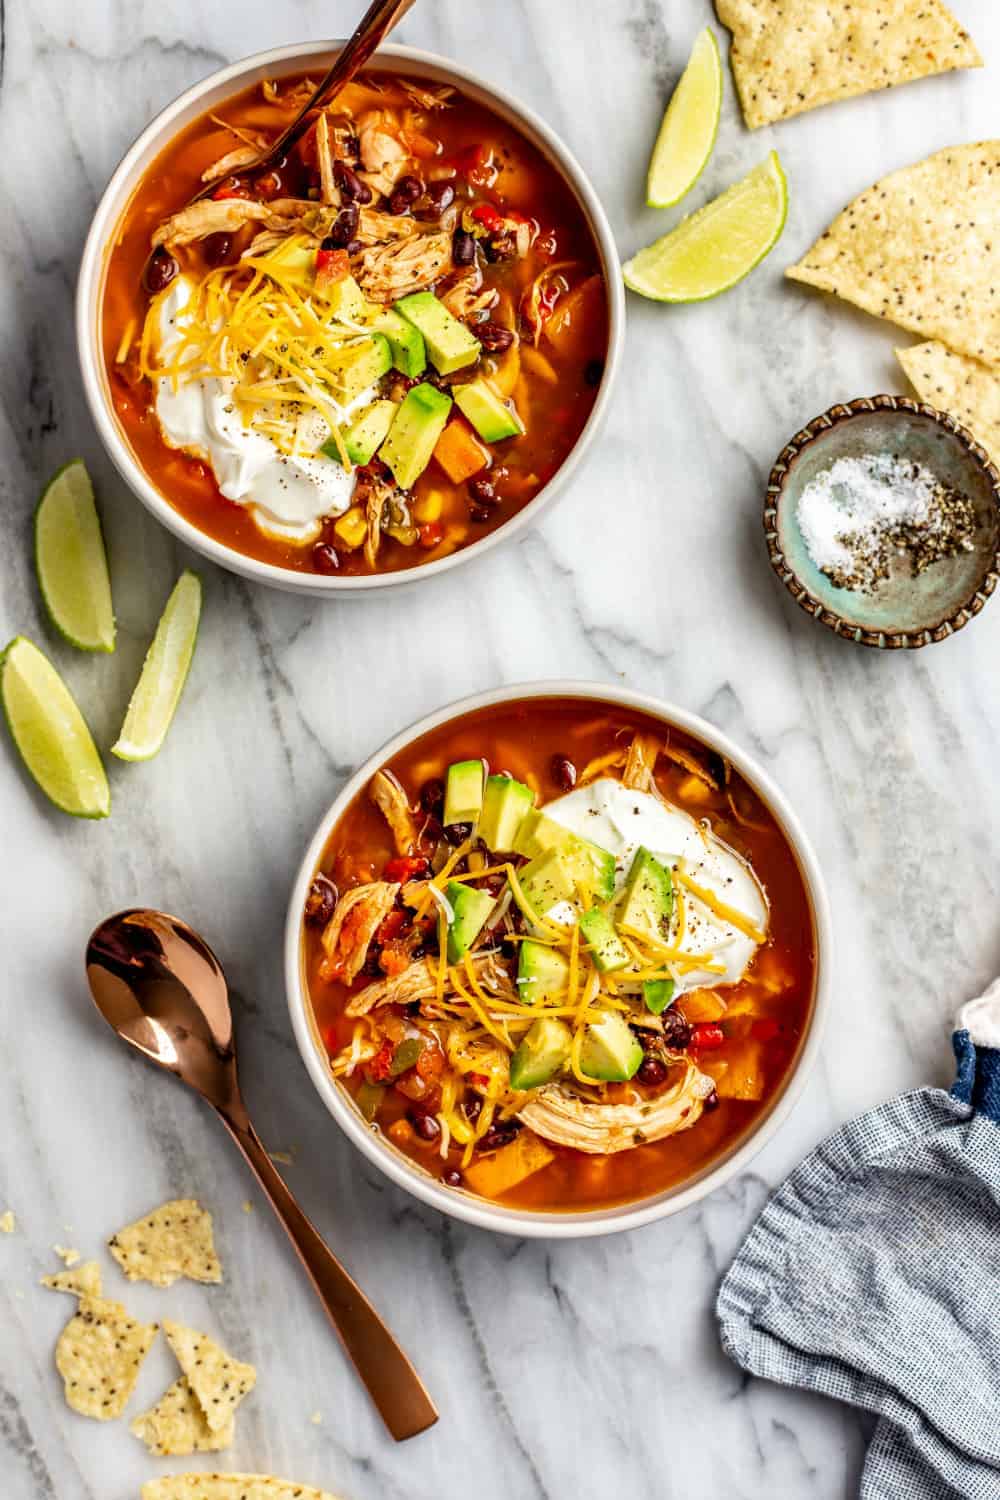 Two bowls of tortilla soup made with rotisserie chicken, garnished with tortilla chips, sour cream and served alongside lime wedges